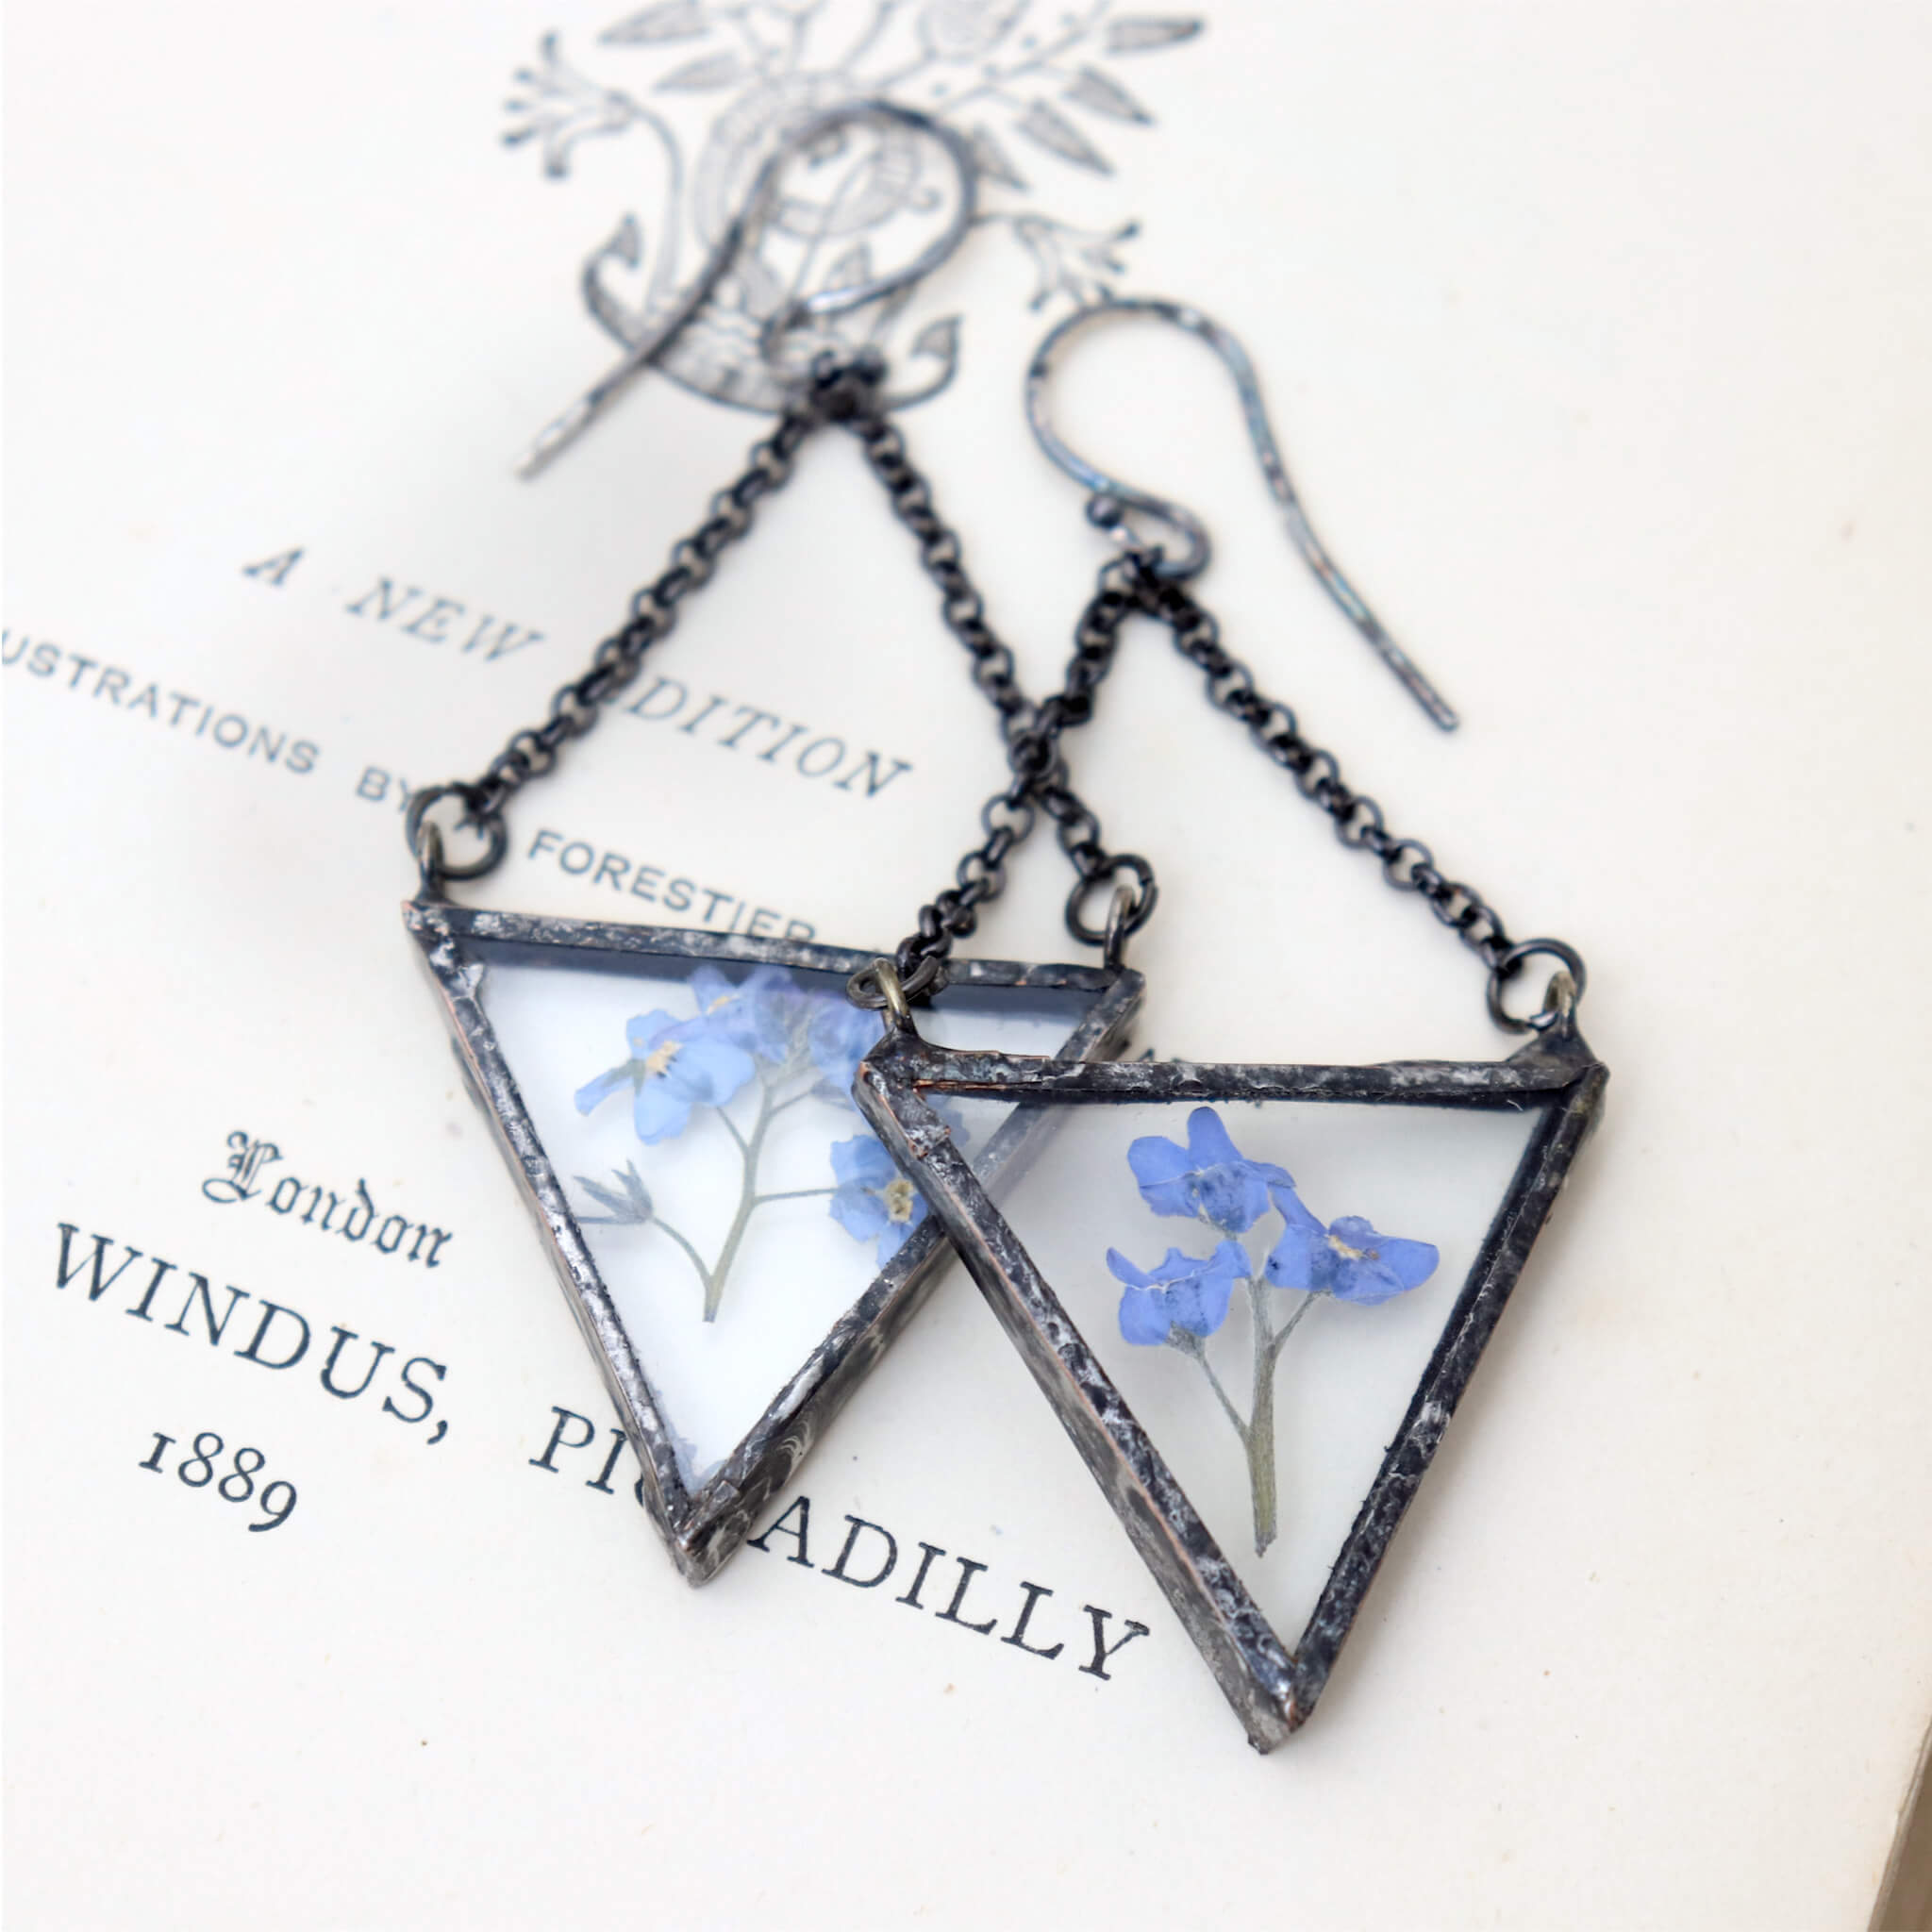 Triangular pressed blue forget-me-not flowers earrings lying on an old book